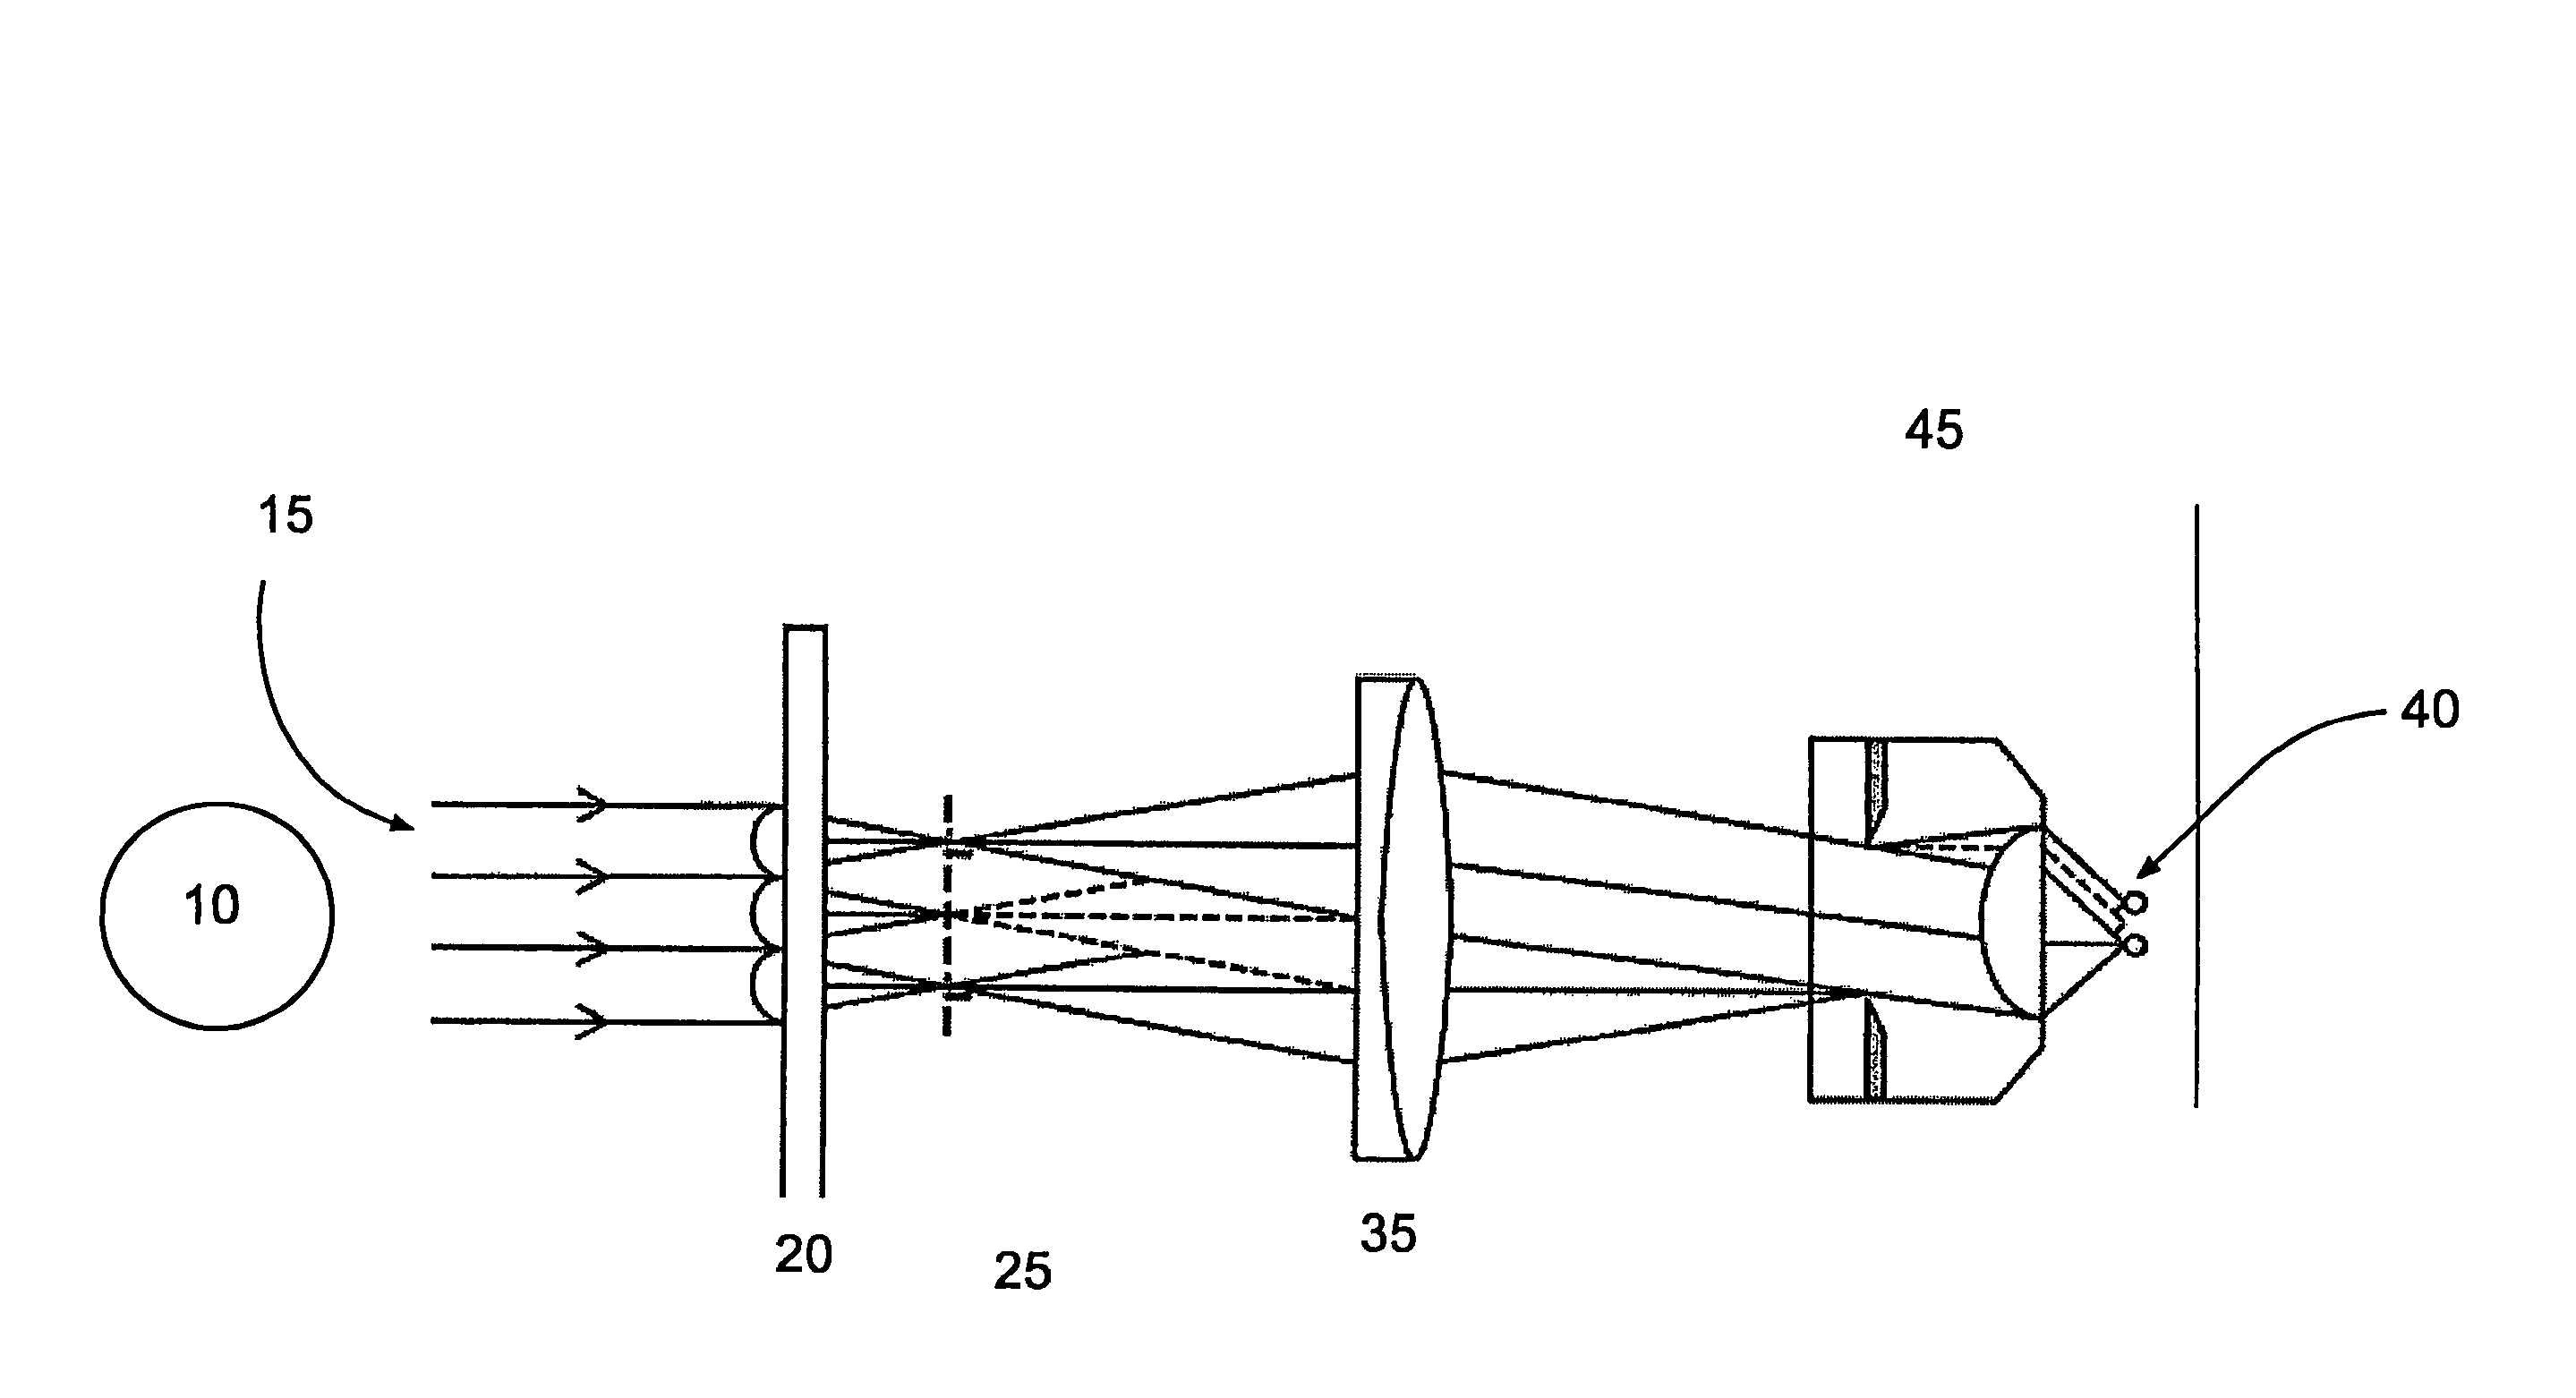 Optical array device and methods of use thereof for screening, analysis and manipulation of particles